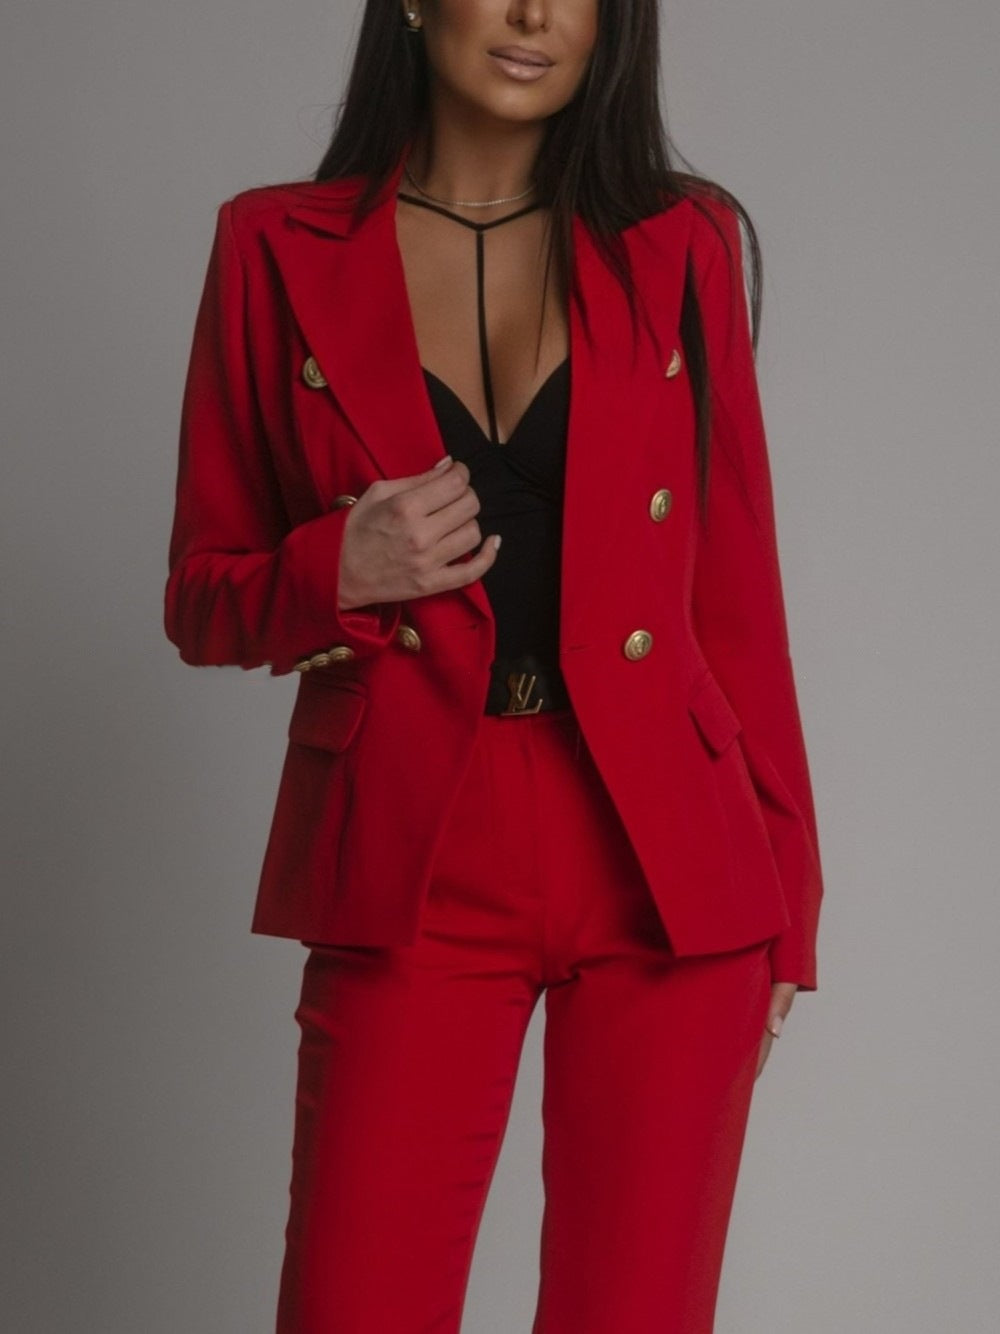 Women's Long-Sleeved Double-Breasted Suit with Stand-Up Collar